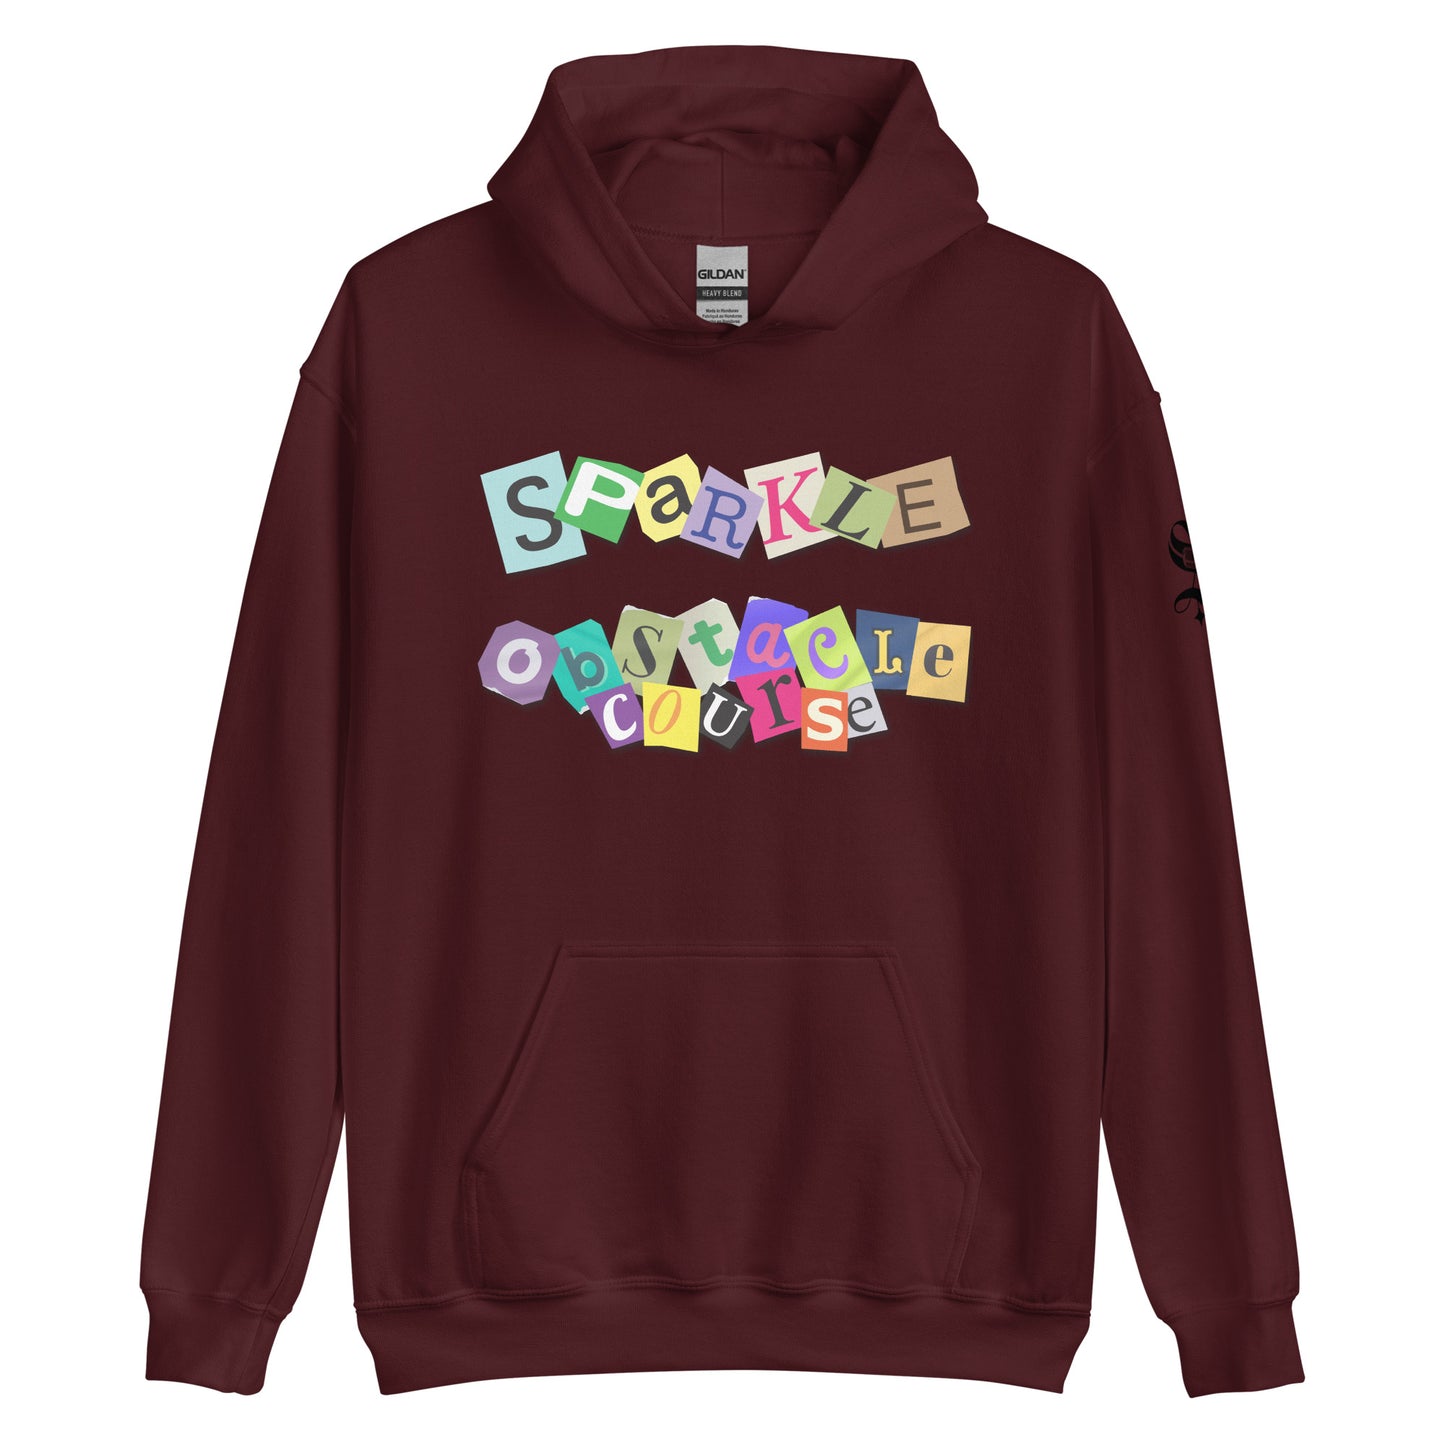 Sparkle: 'Obstacle Course' Unisex Hoodie